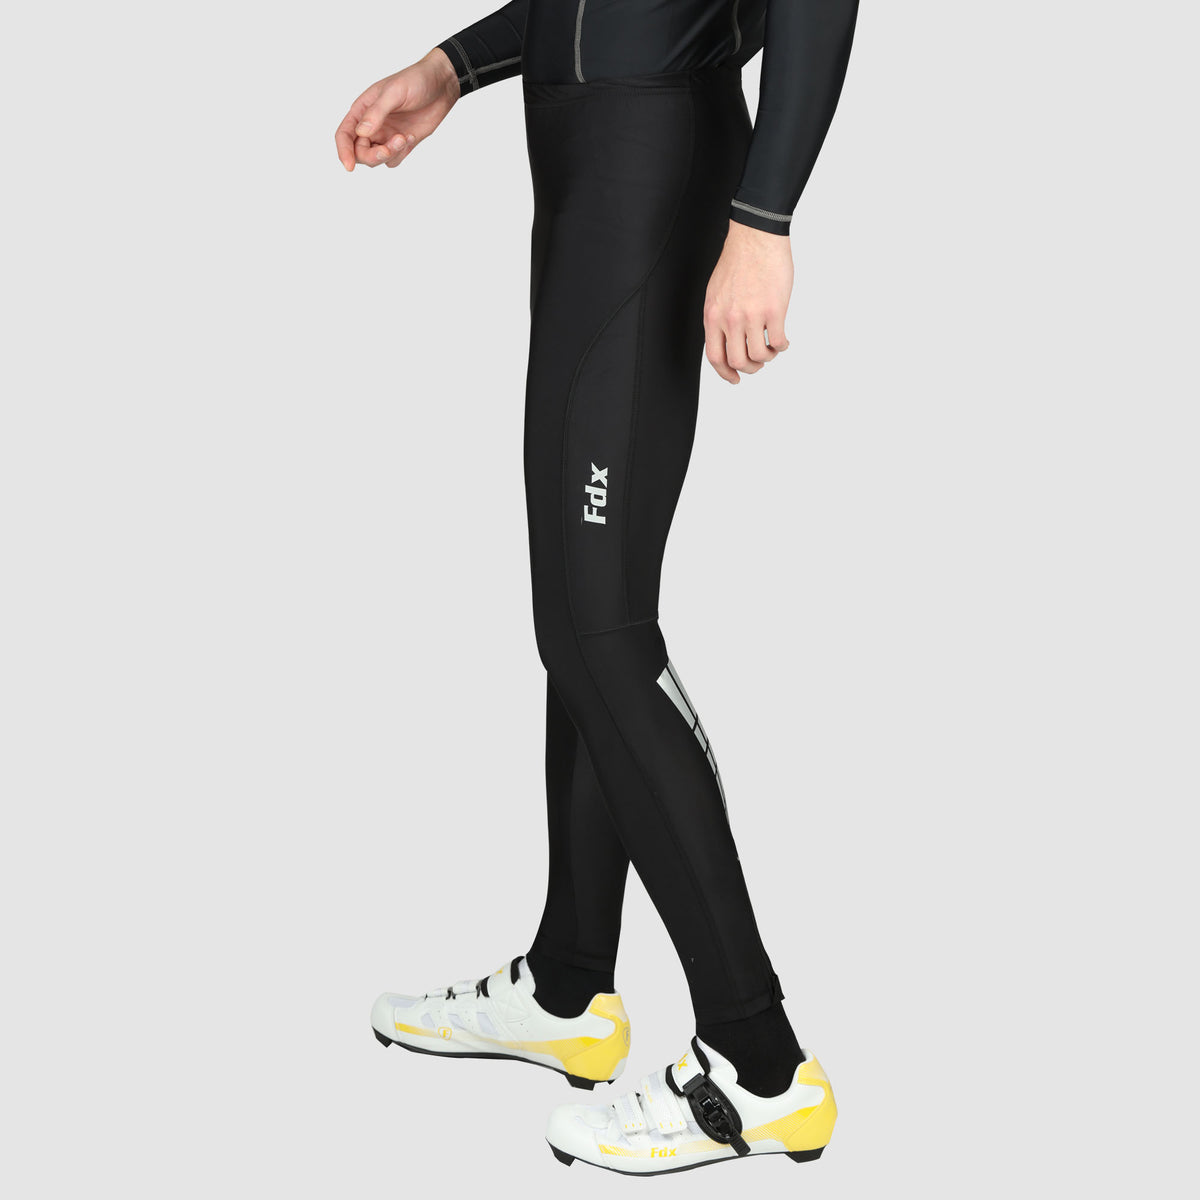 Fashion Cycling Tights, Sport Compression Leggings For Men, Fitness Gym  Running Leggings,STRAVA White 4 @ Best Price Online